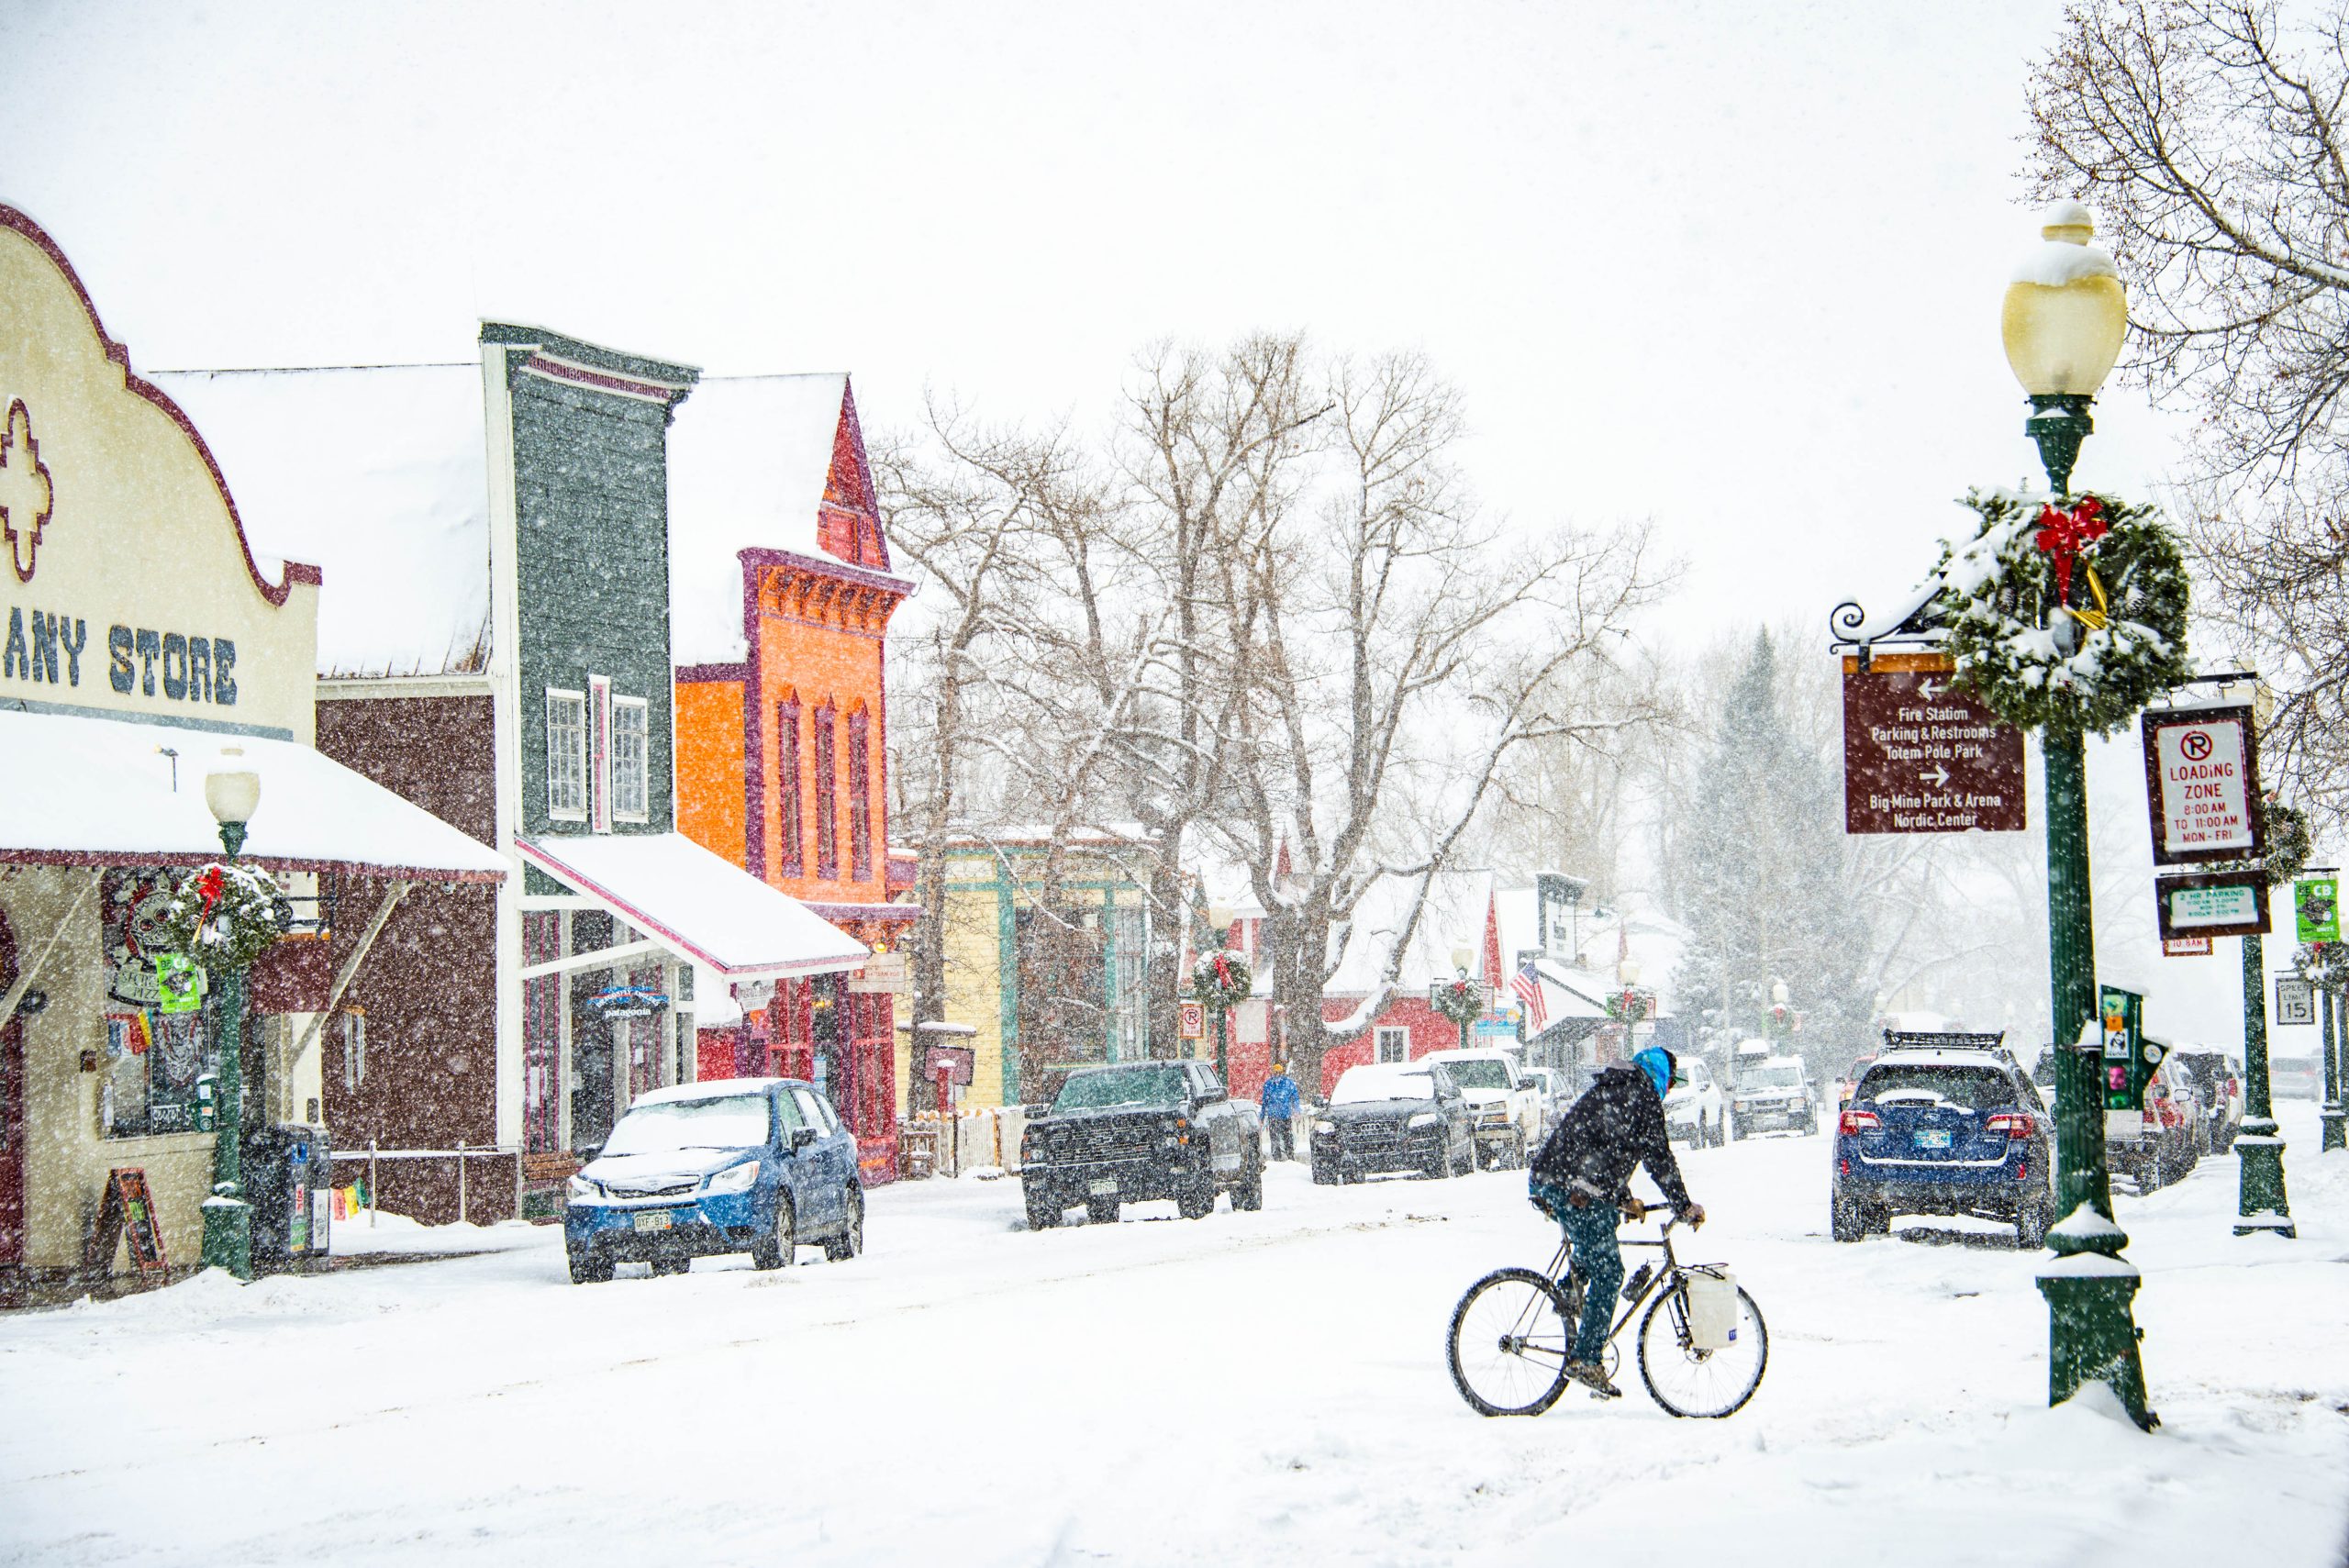 A person on a bike rides on a snowy downtown street